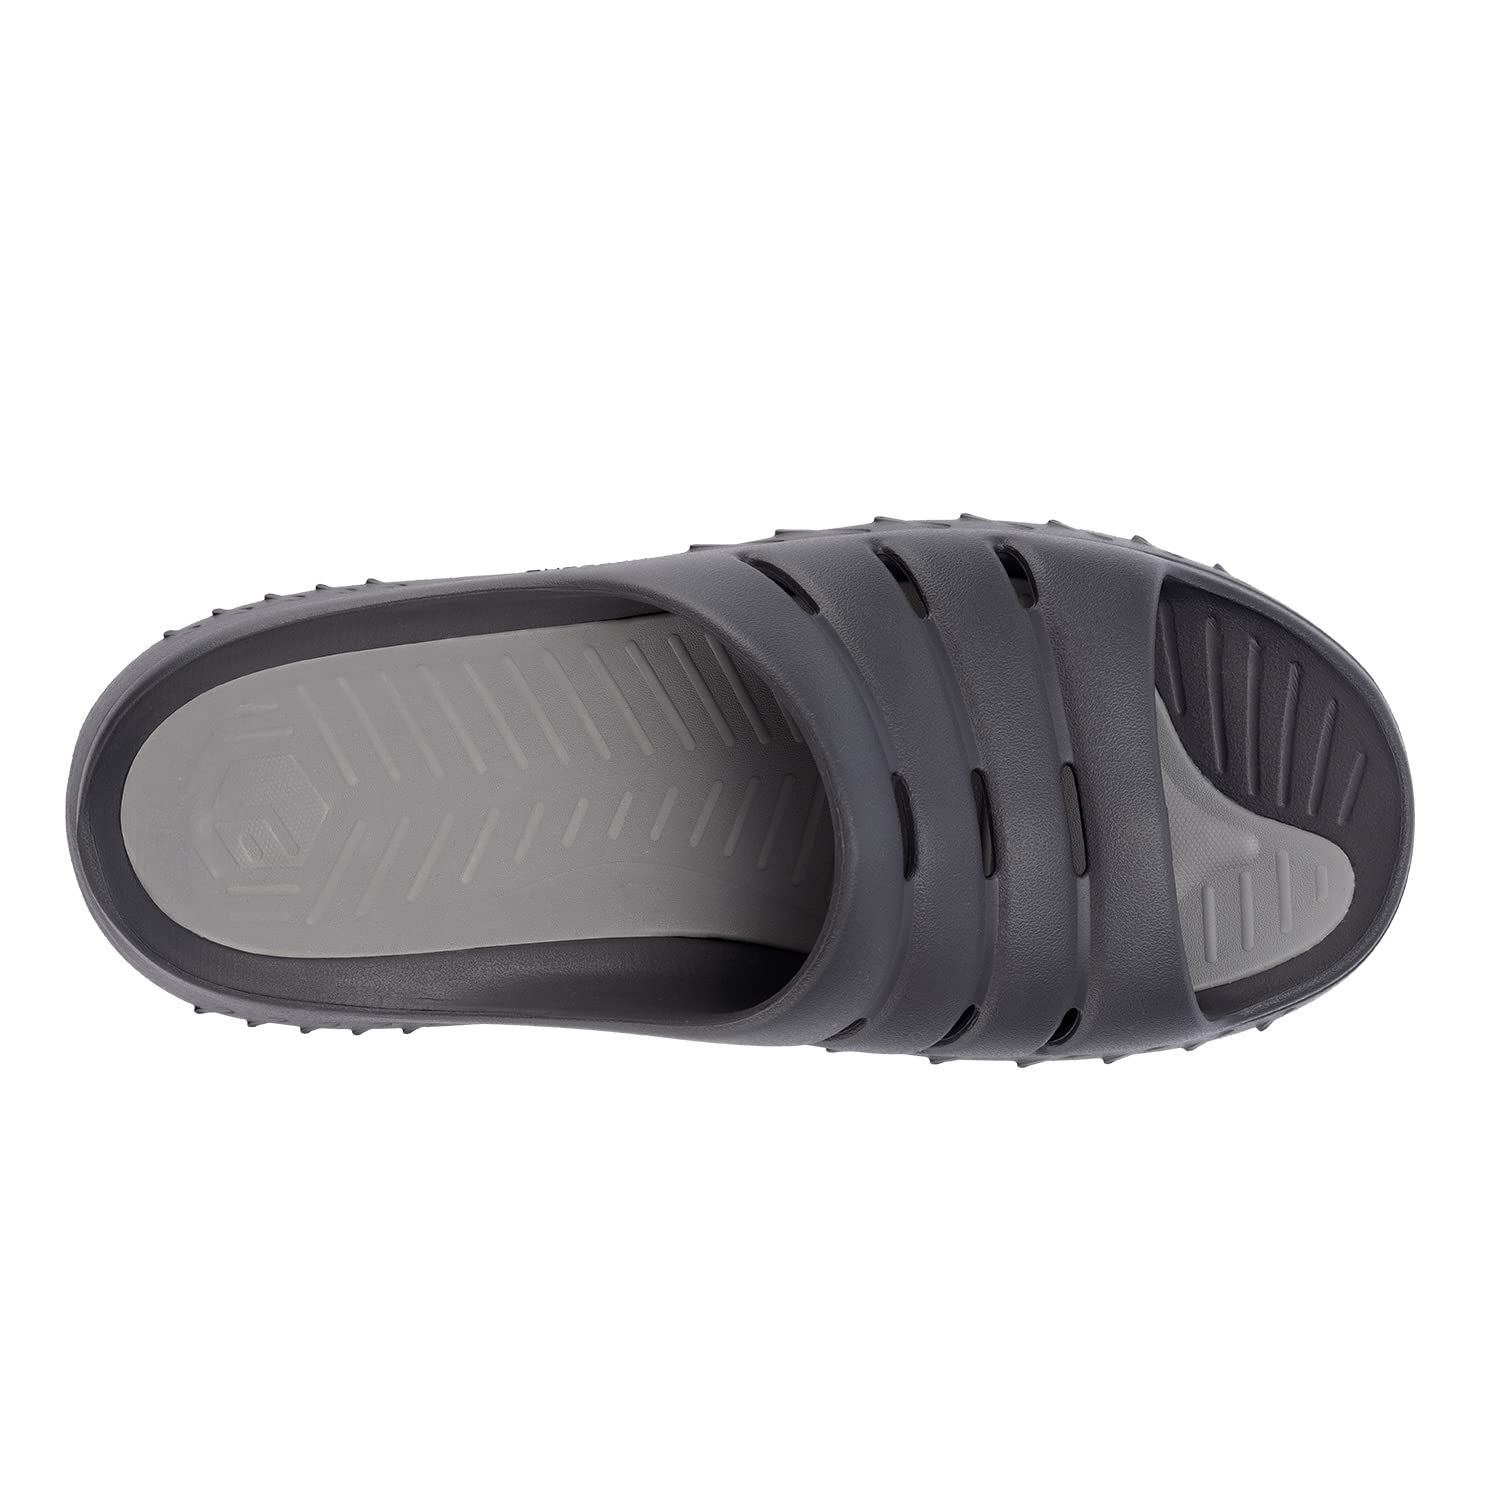 FitVille Men's Recovery Slide Sandals ArchMax Cushioned Athletic Sandals for All Day Comfort